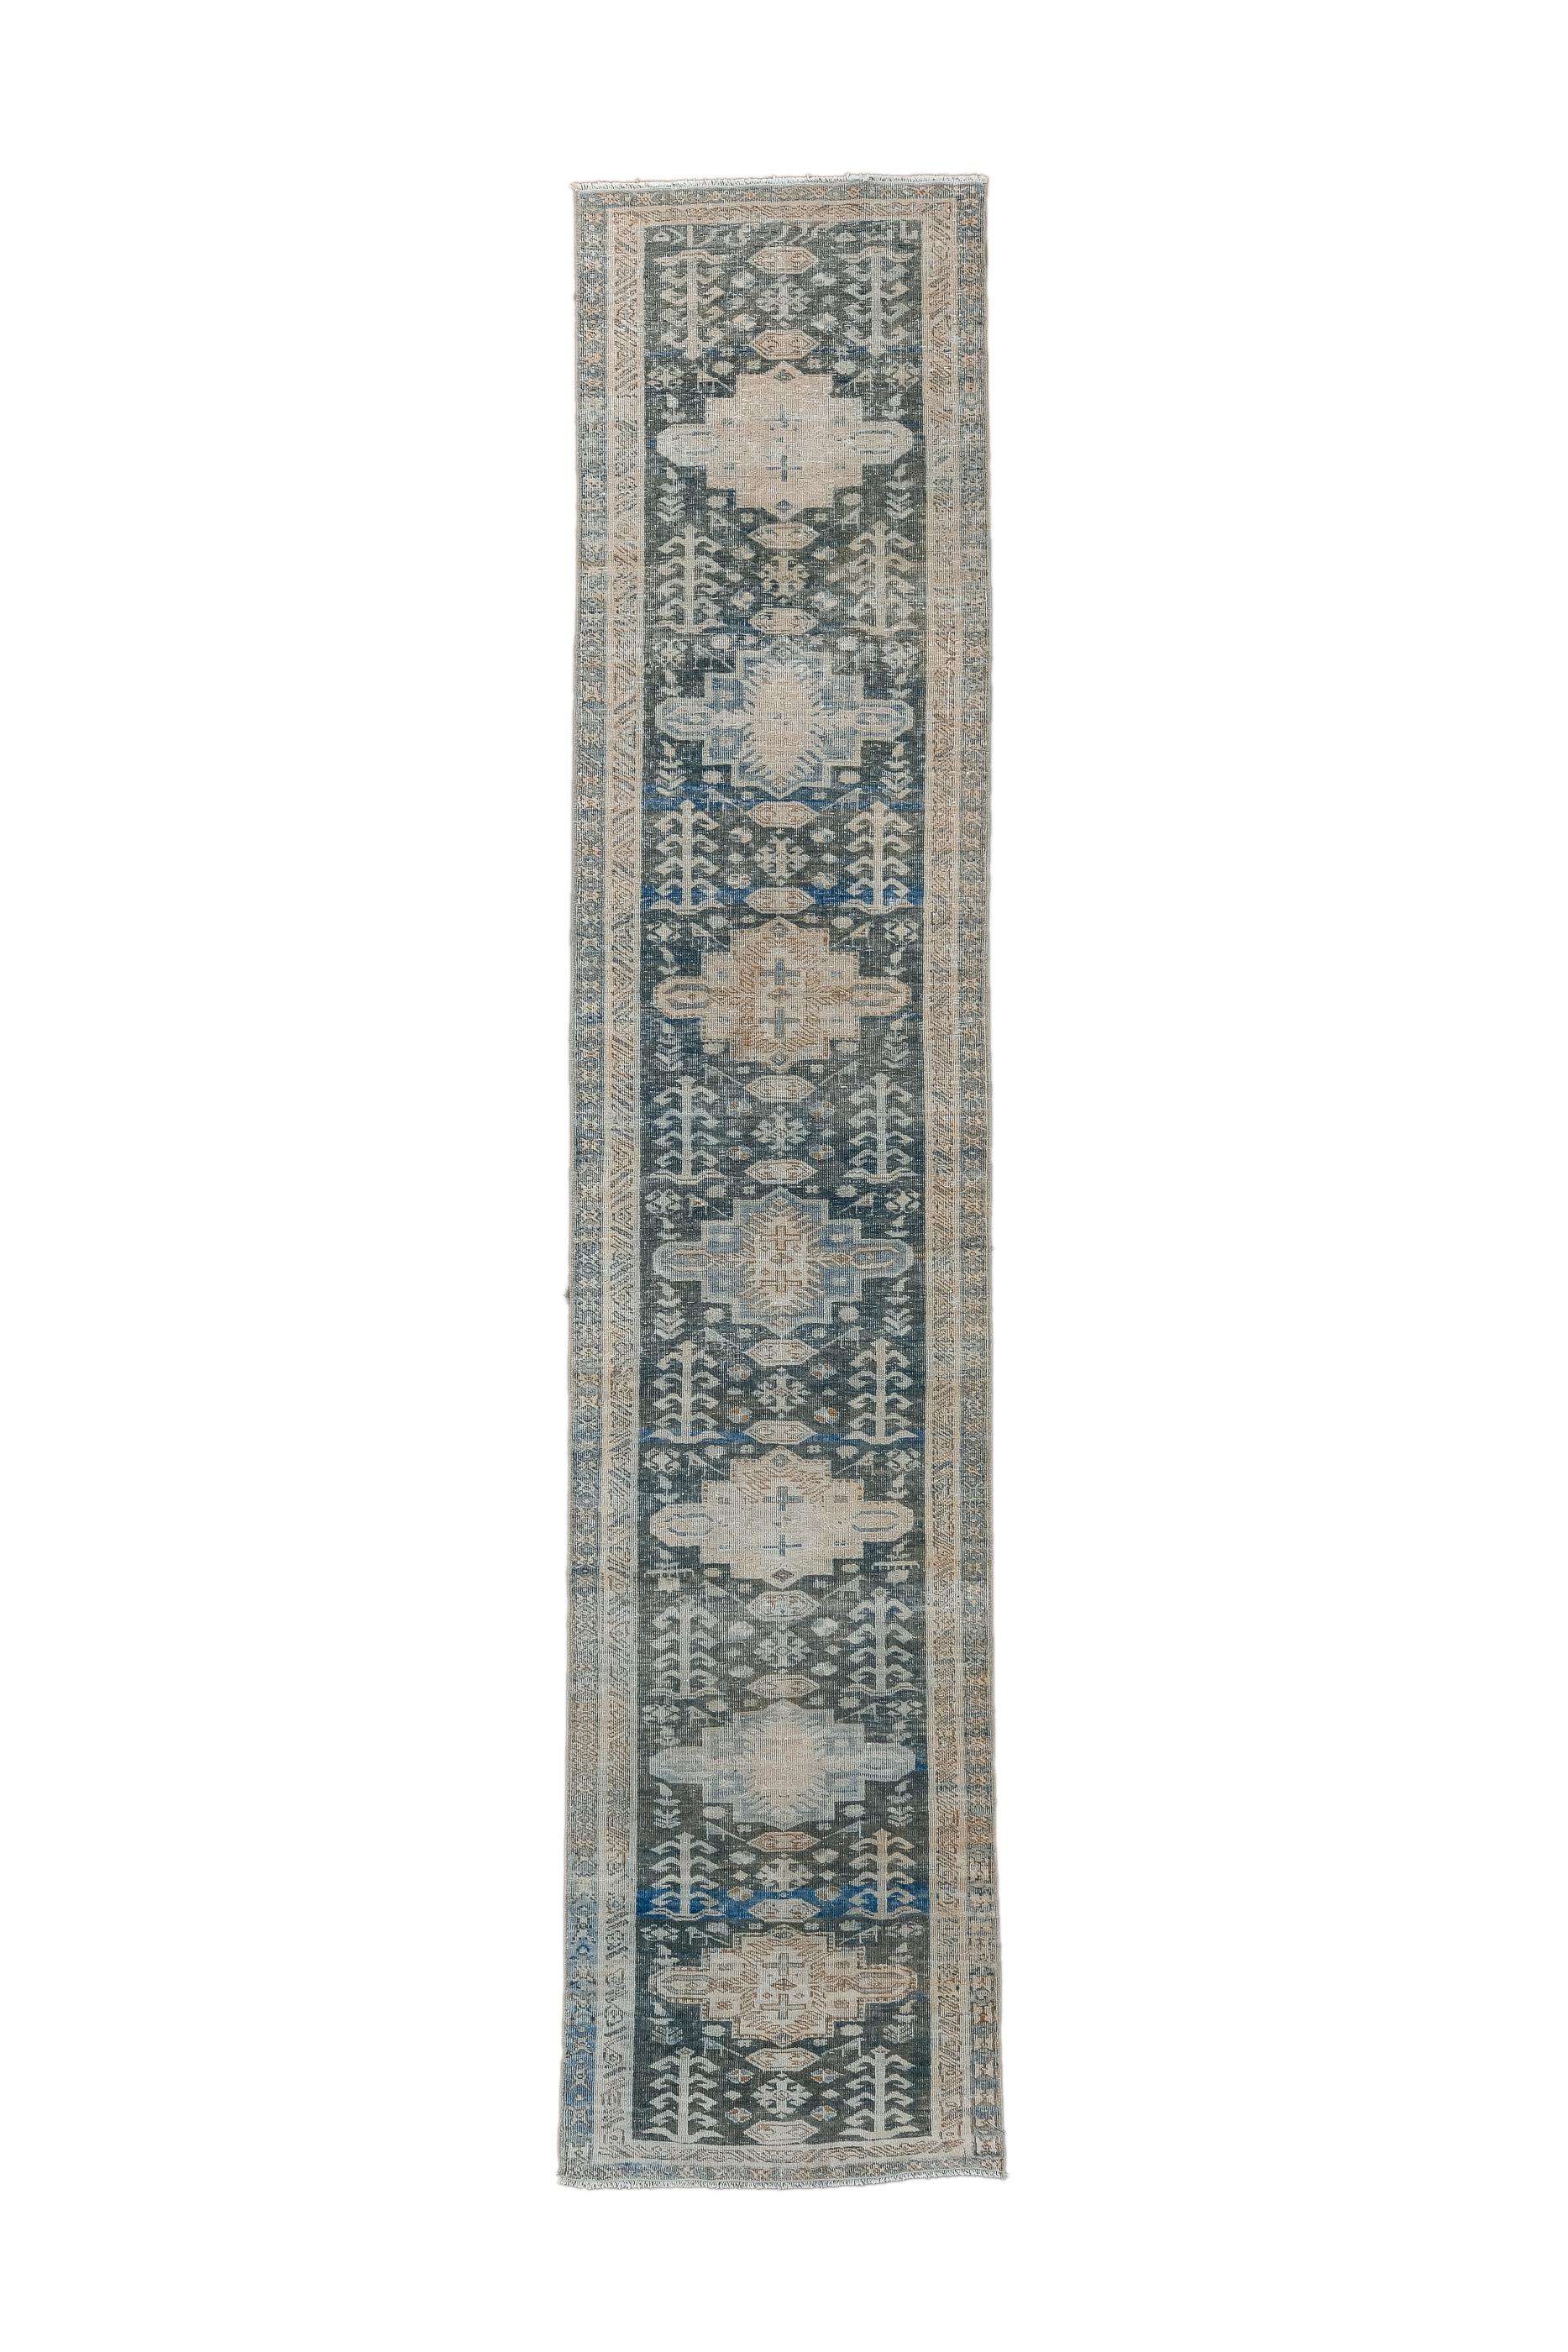 The blue field features  seven similar cartouches in green and straw, with herringbone plants alongside along with tiny tertiary flowers and birds. Ivory inner border. Moderate weave. Unusually narrow for the length.

Rug Size
2'4x10'10